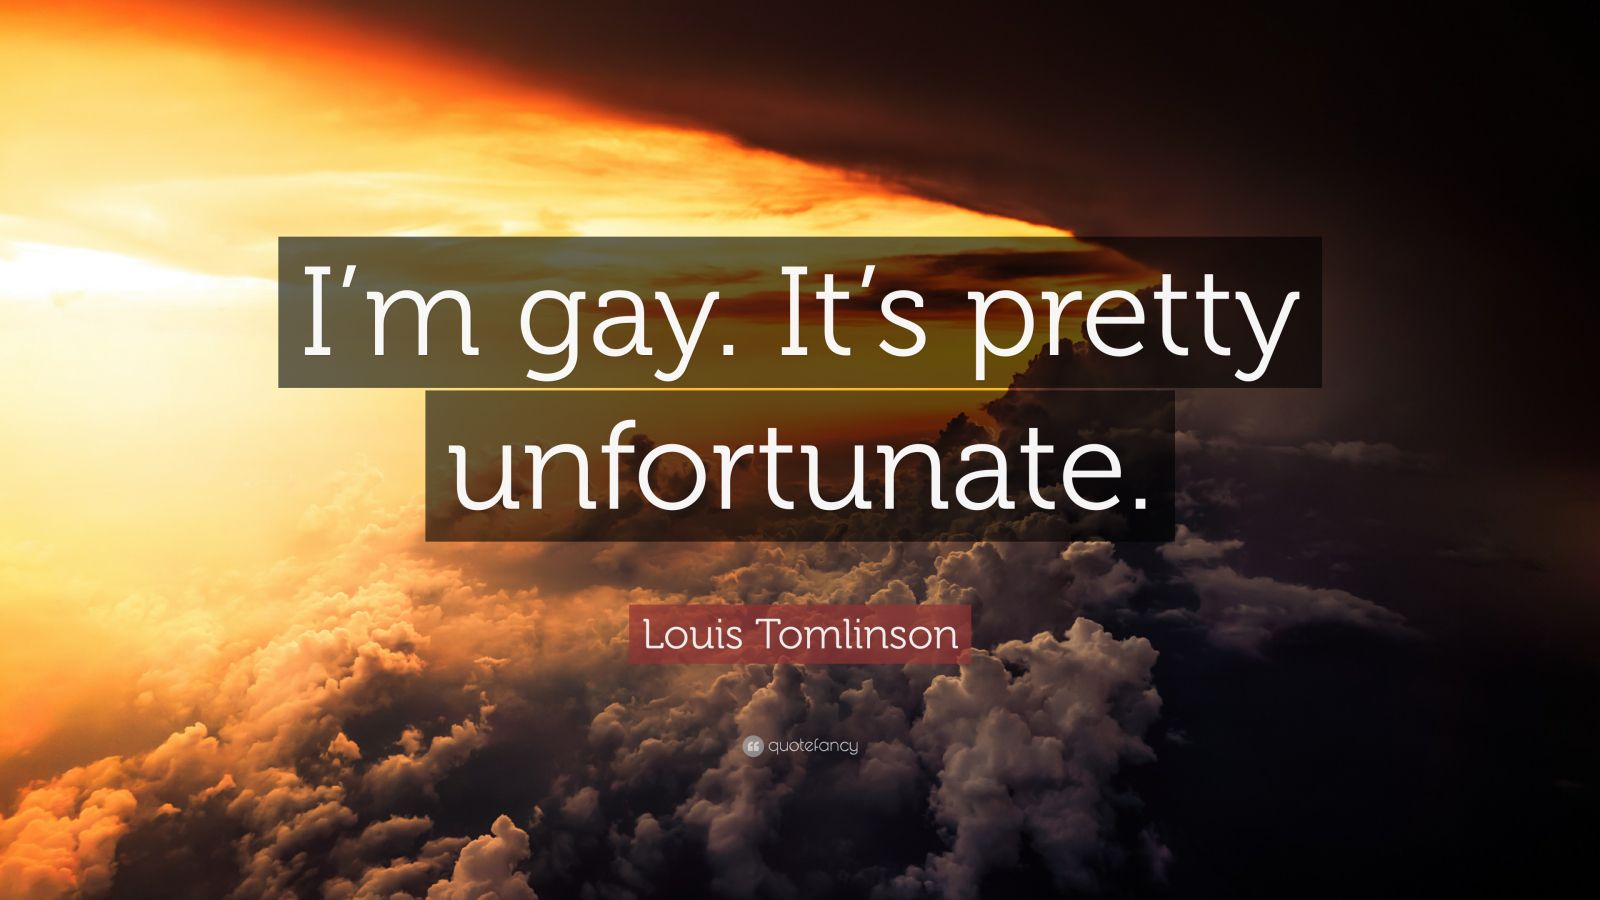 Louis Tomlinson Quote: “I’m gay. It’s pretty unfortunate.” (12 wallpapers) - Quotefancy